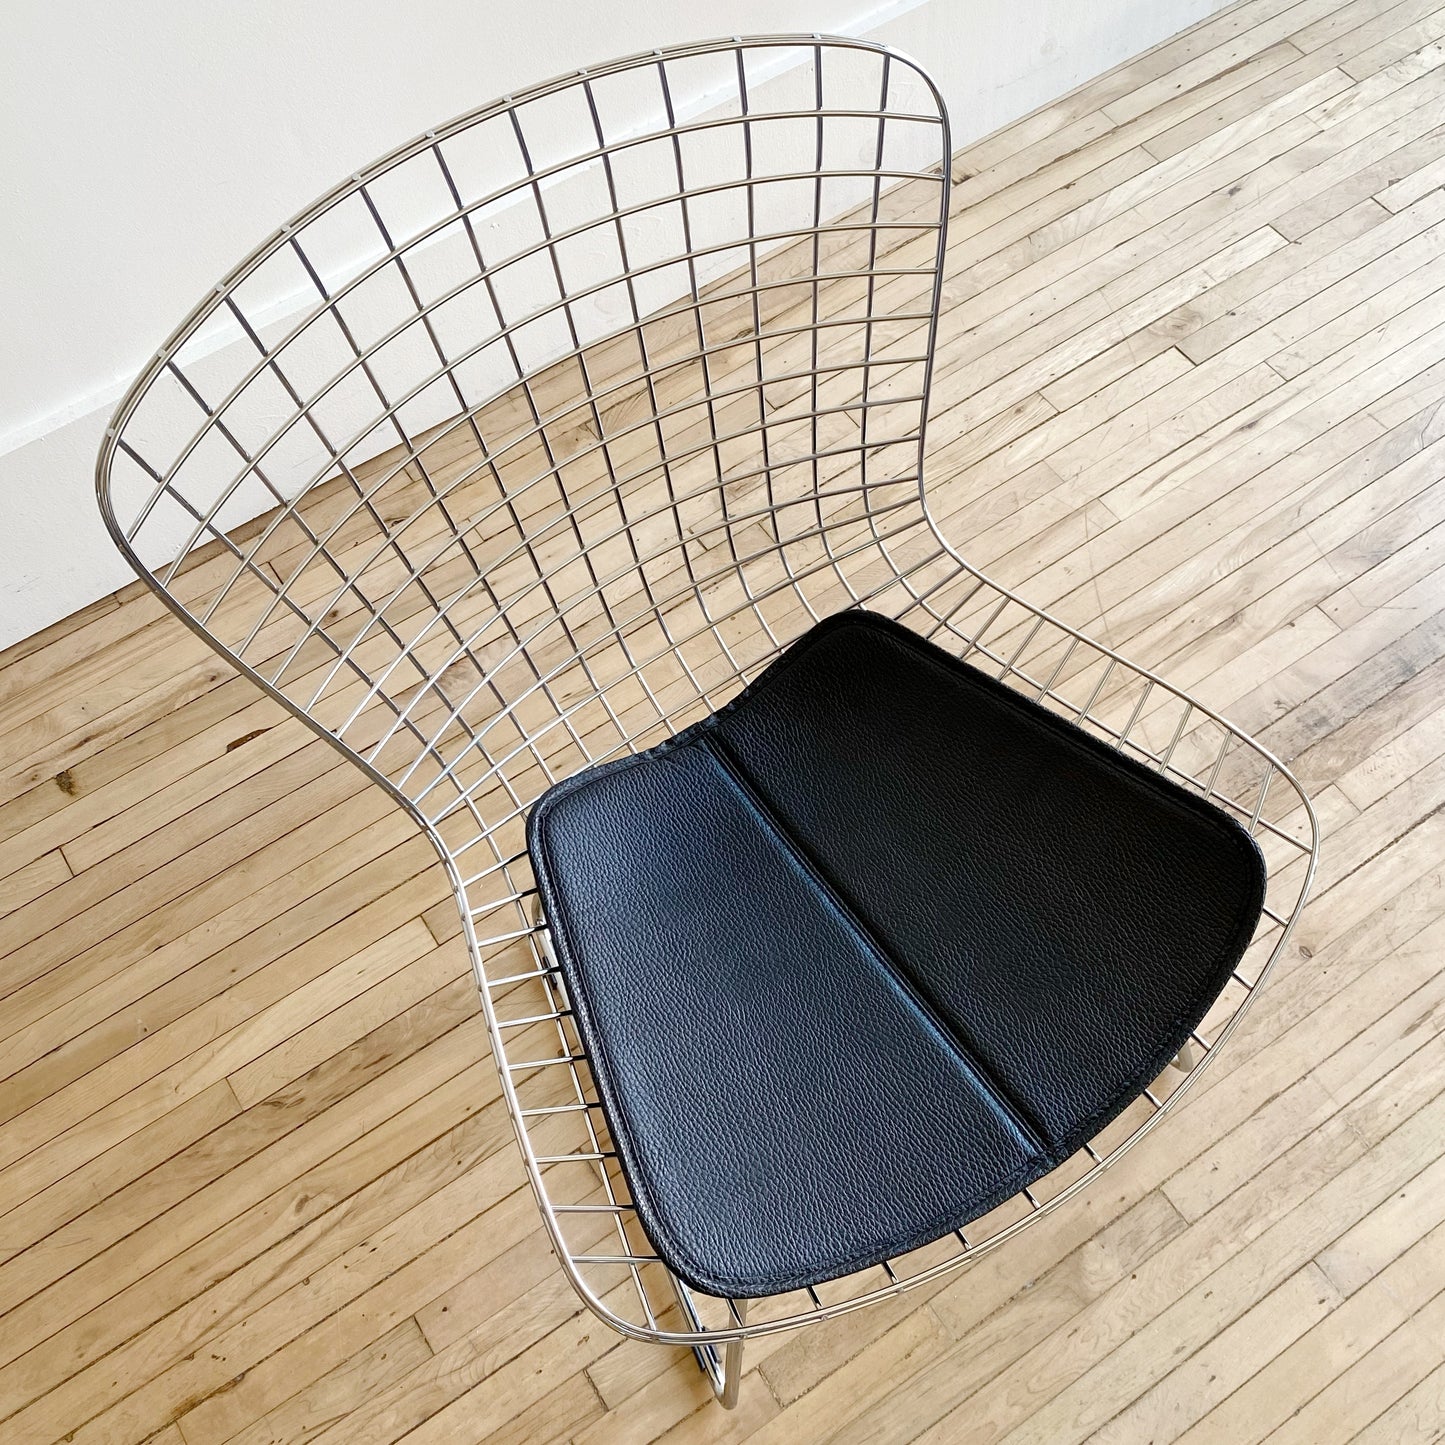 Set of 4 Bertoia-Style Chairs